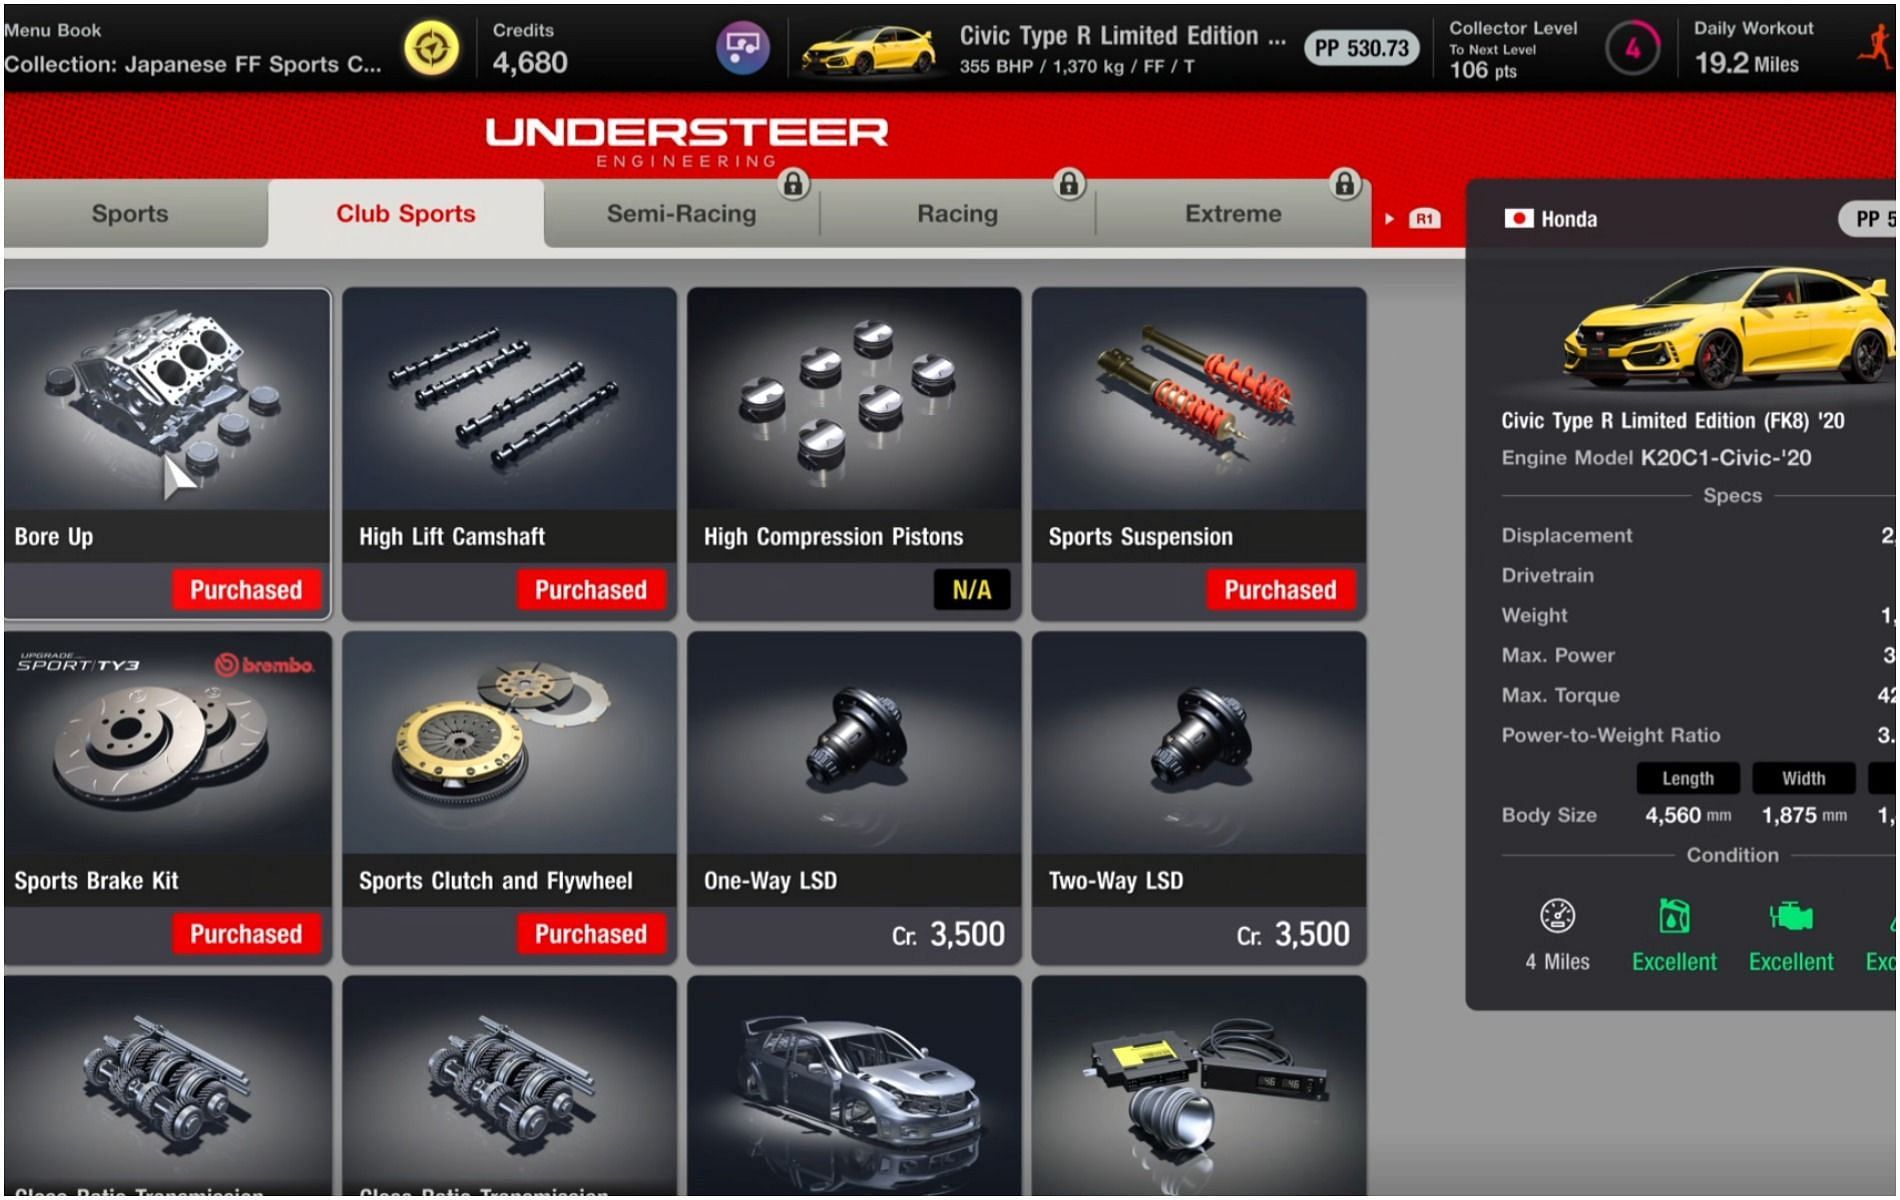 There is a wide array of parts players can purchase for their cars in-game, using credits (Image via Polyphony Digital)